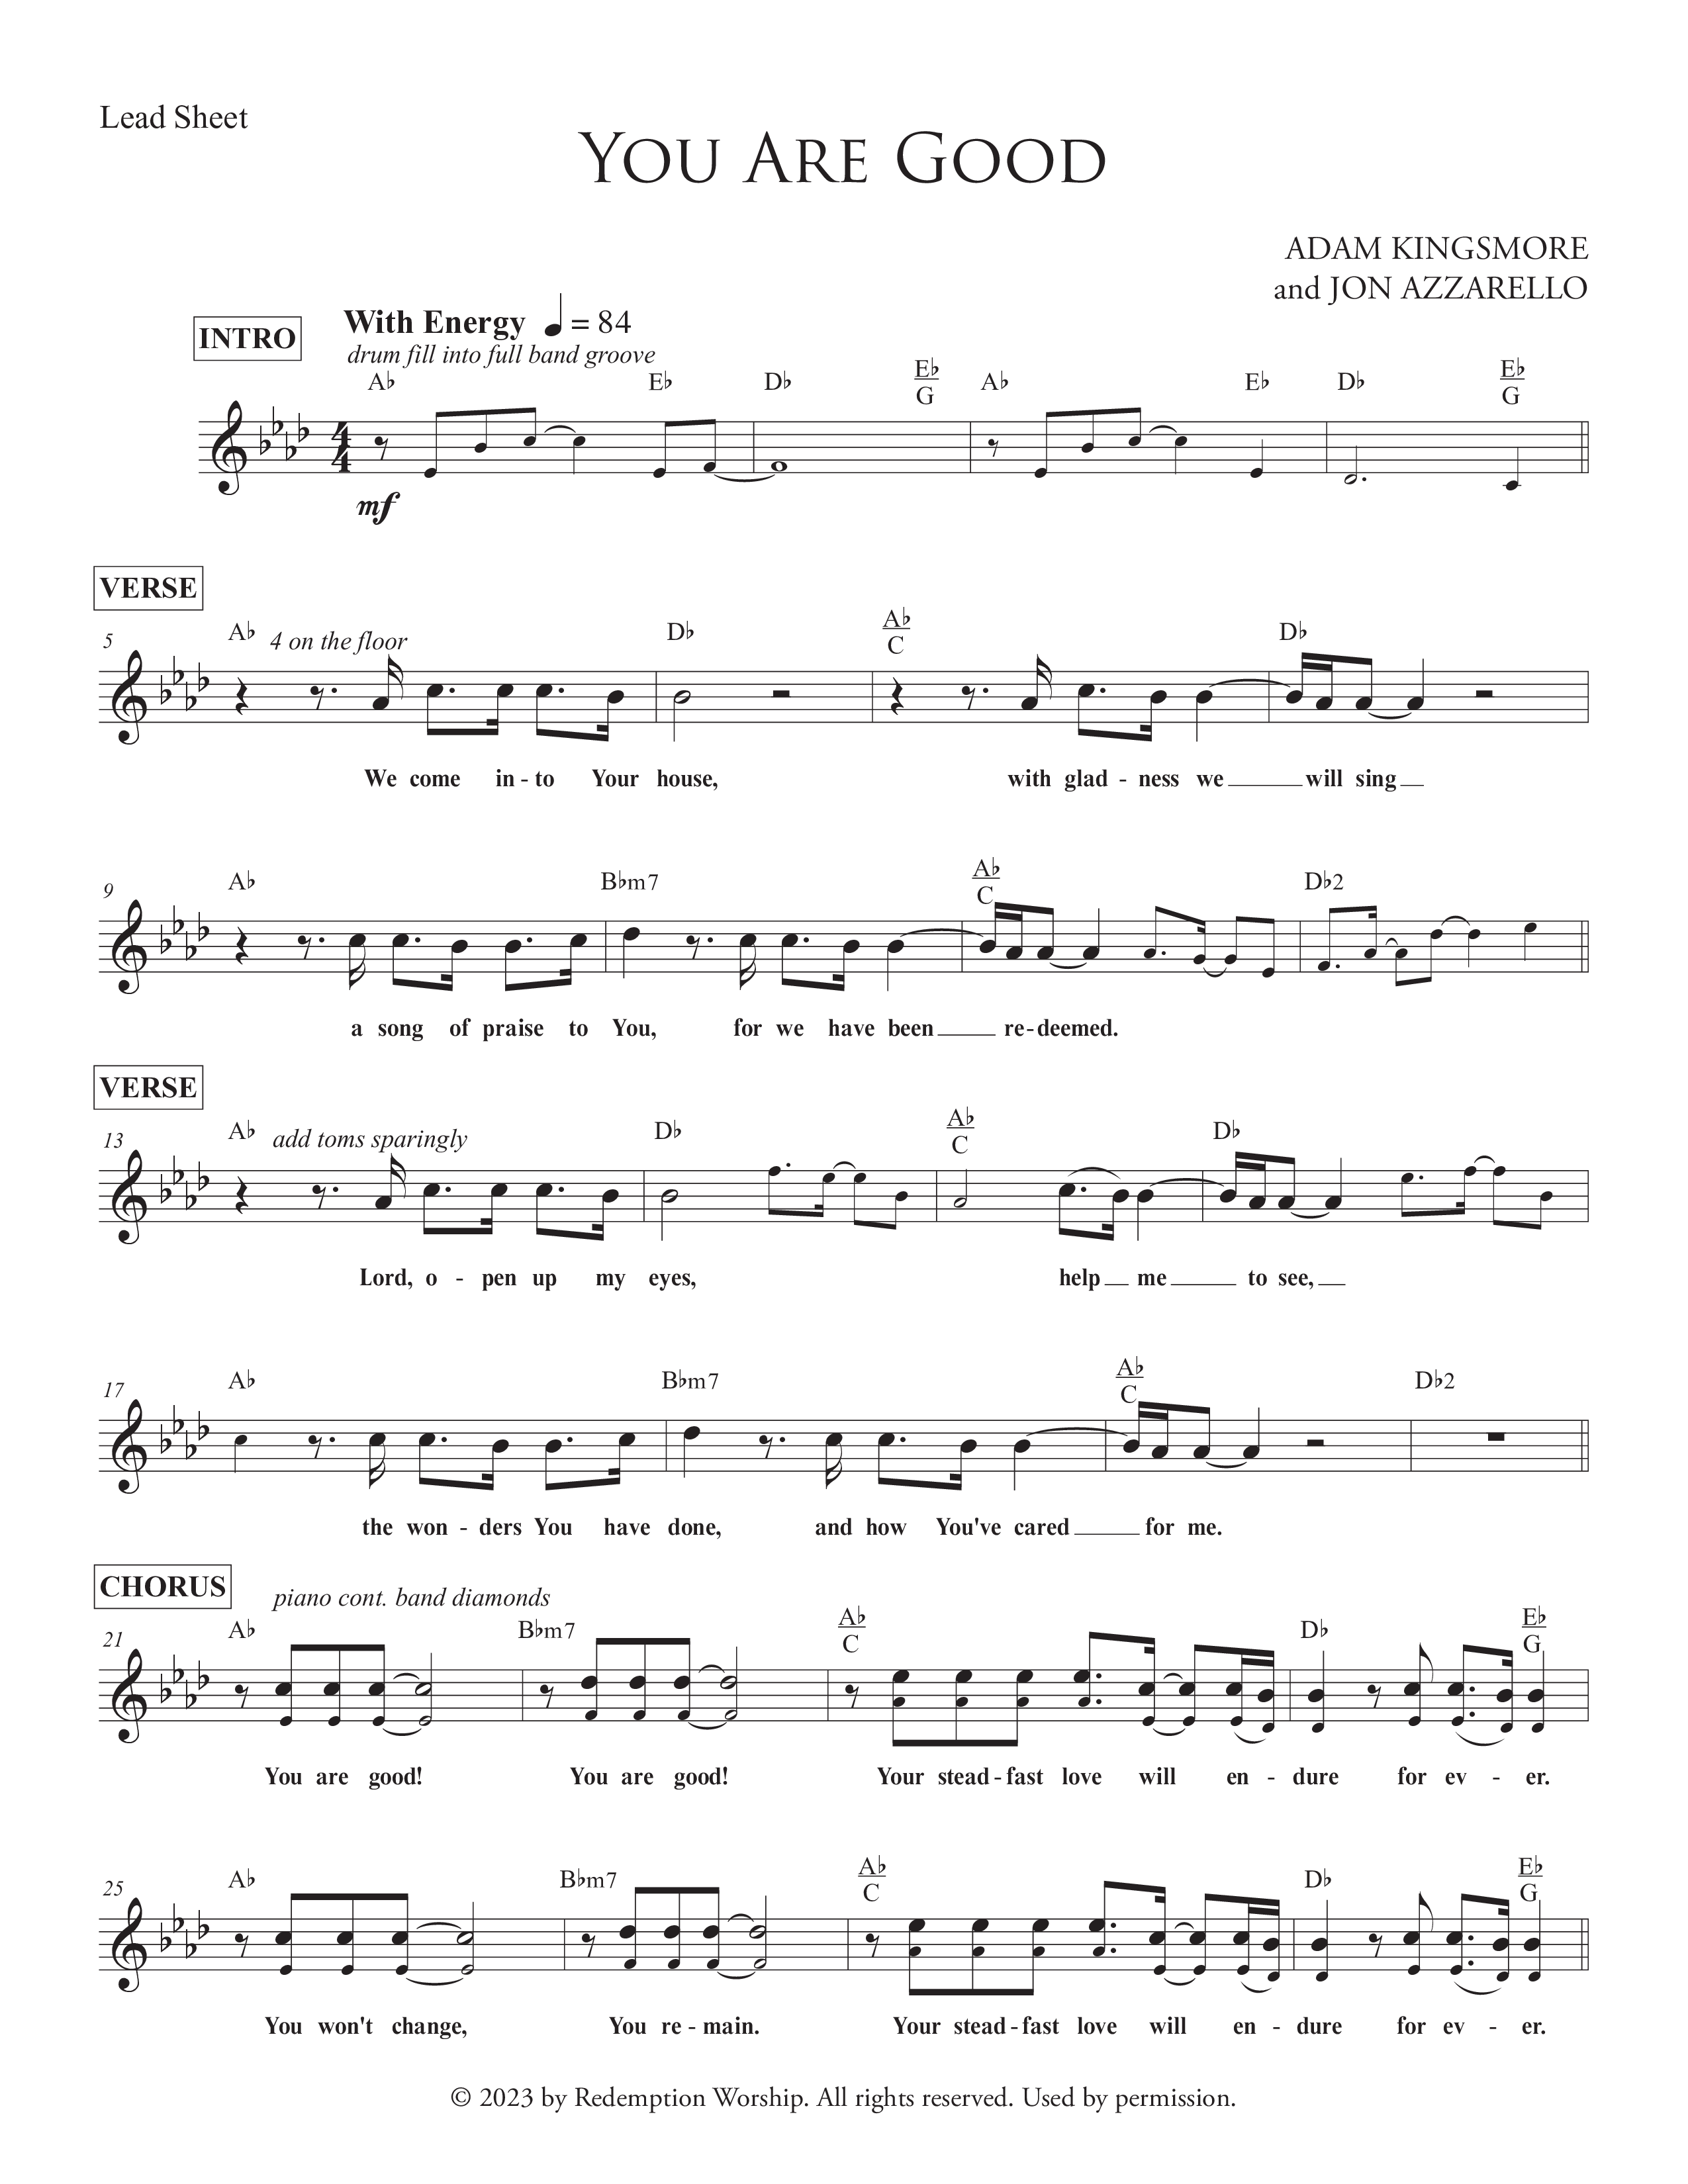 You Are Good Lead Sheet (SAT) (Redemption Worship)